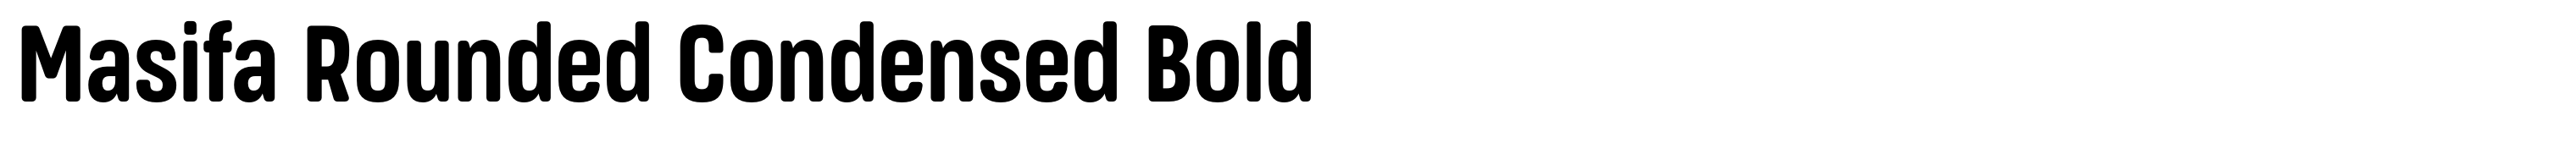 Masifa Rounded Condensed Bold